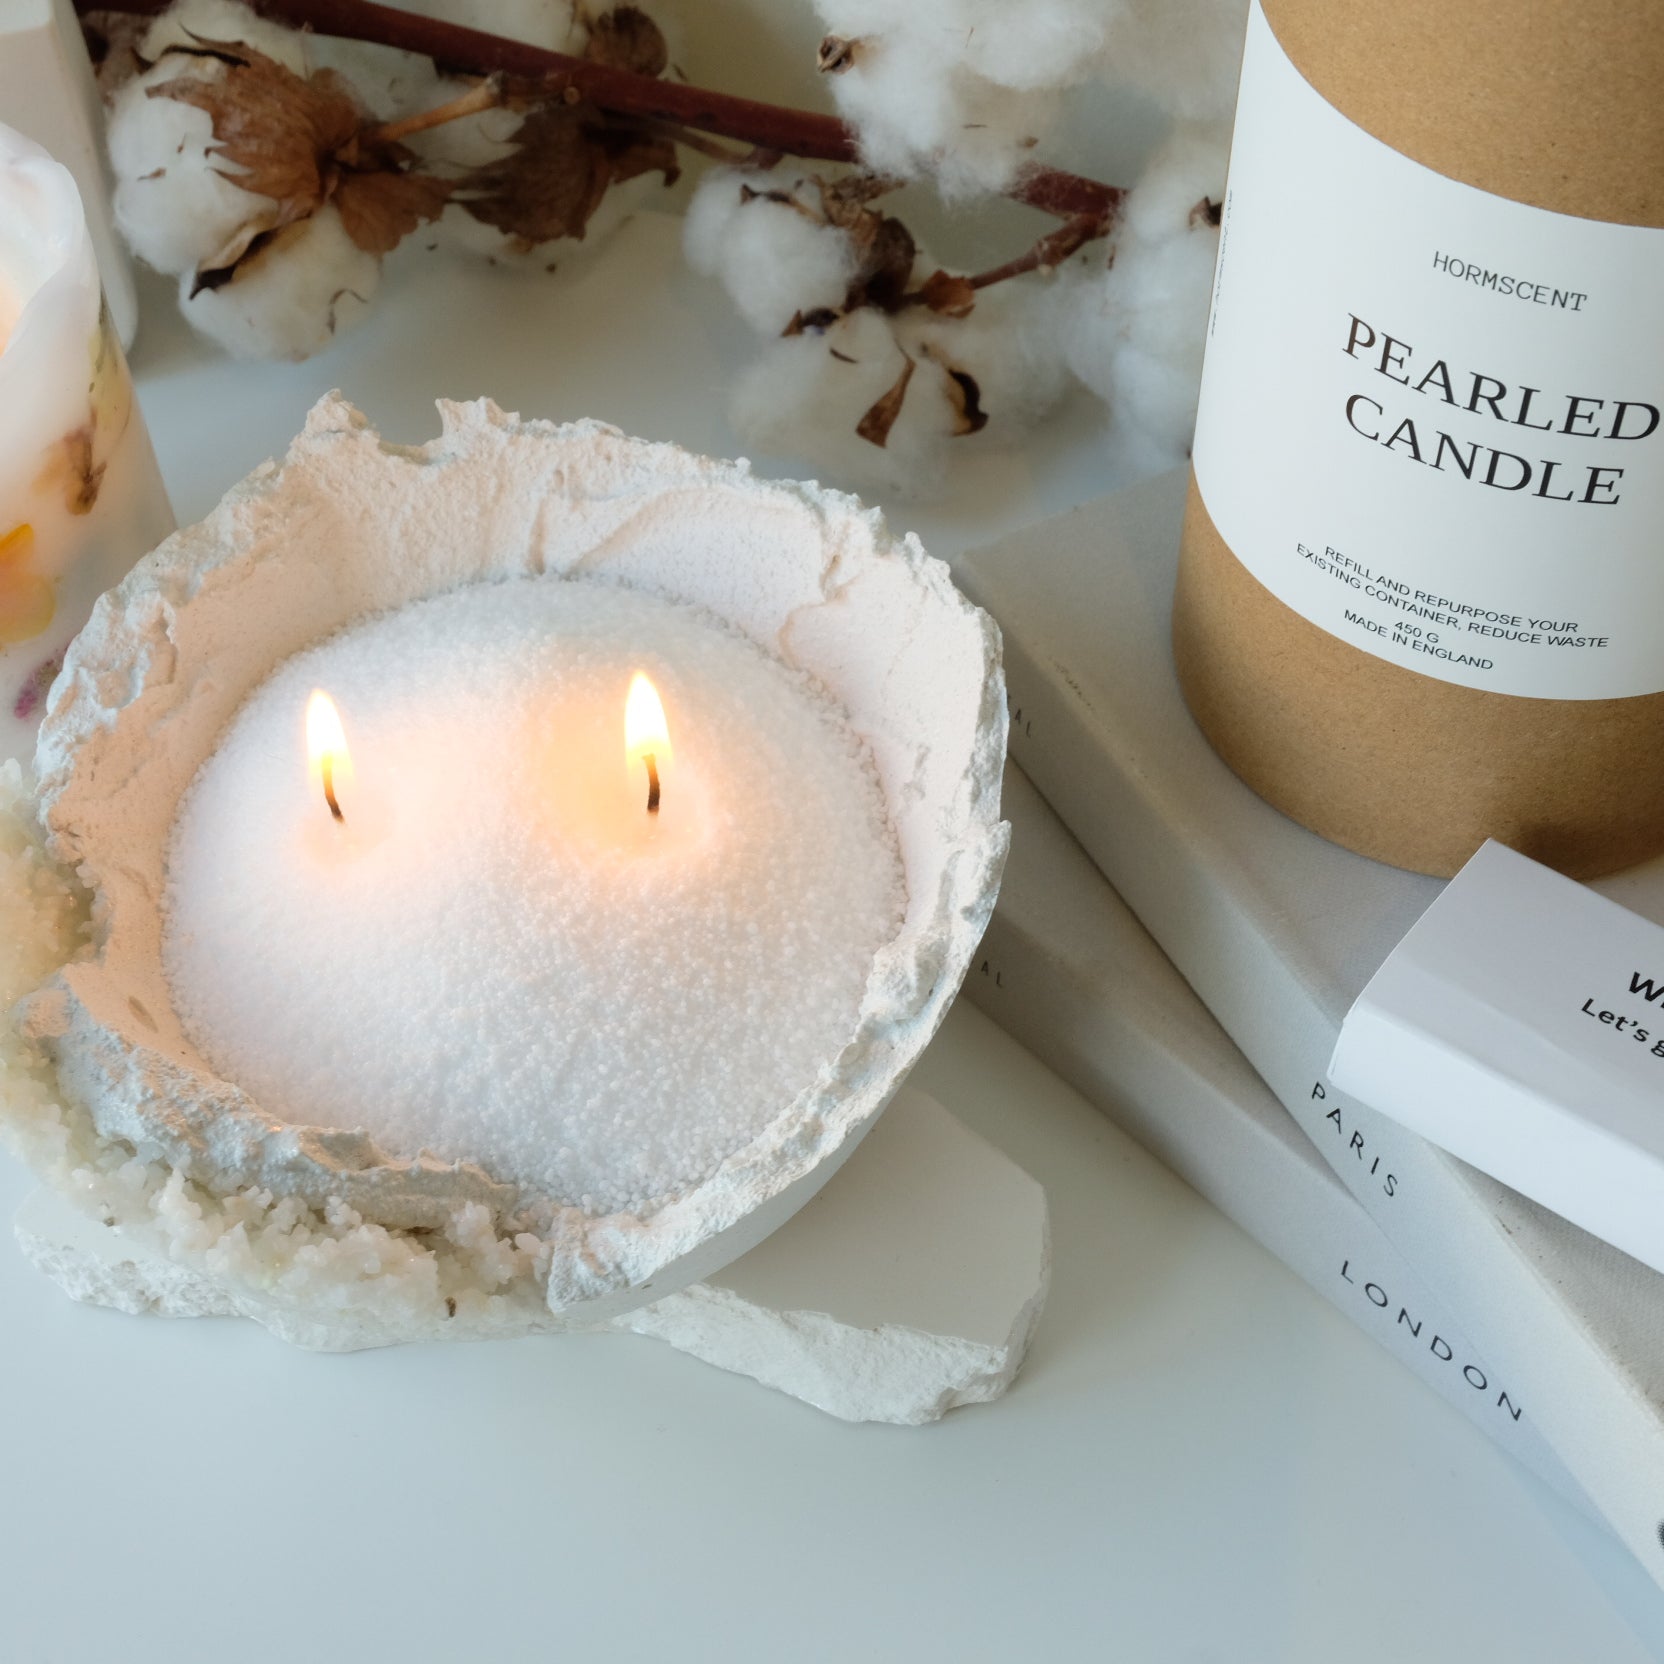 How are you styling your pearled candles for Thanksgiving? They